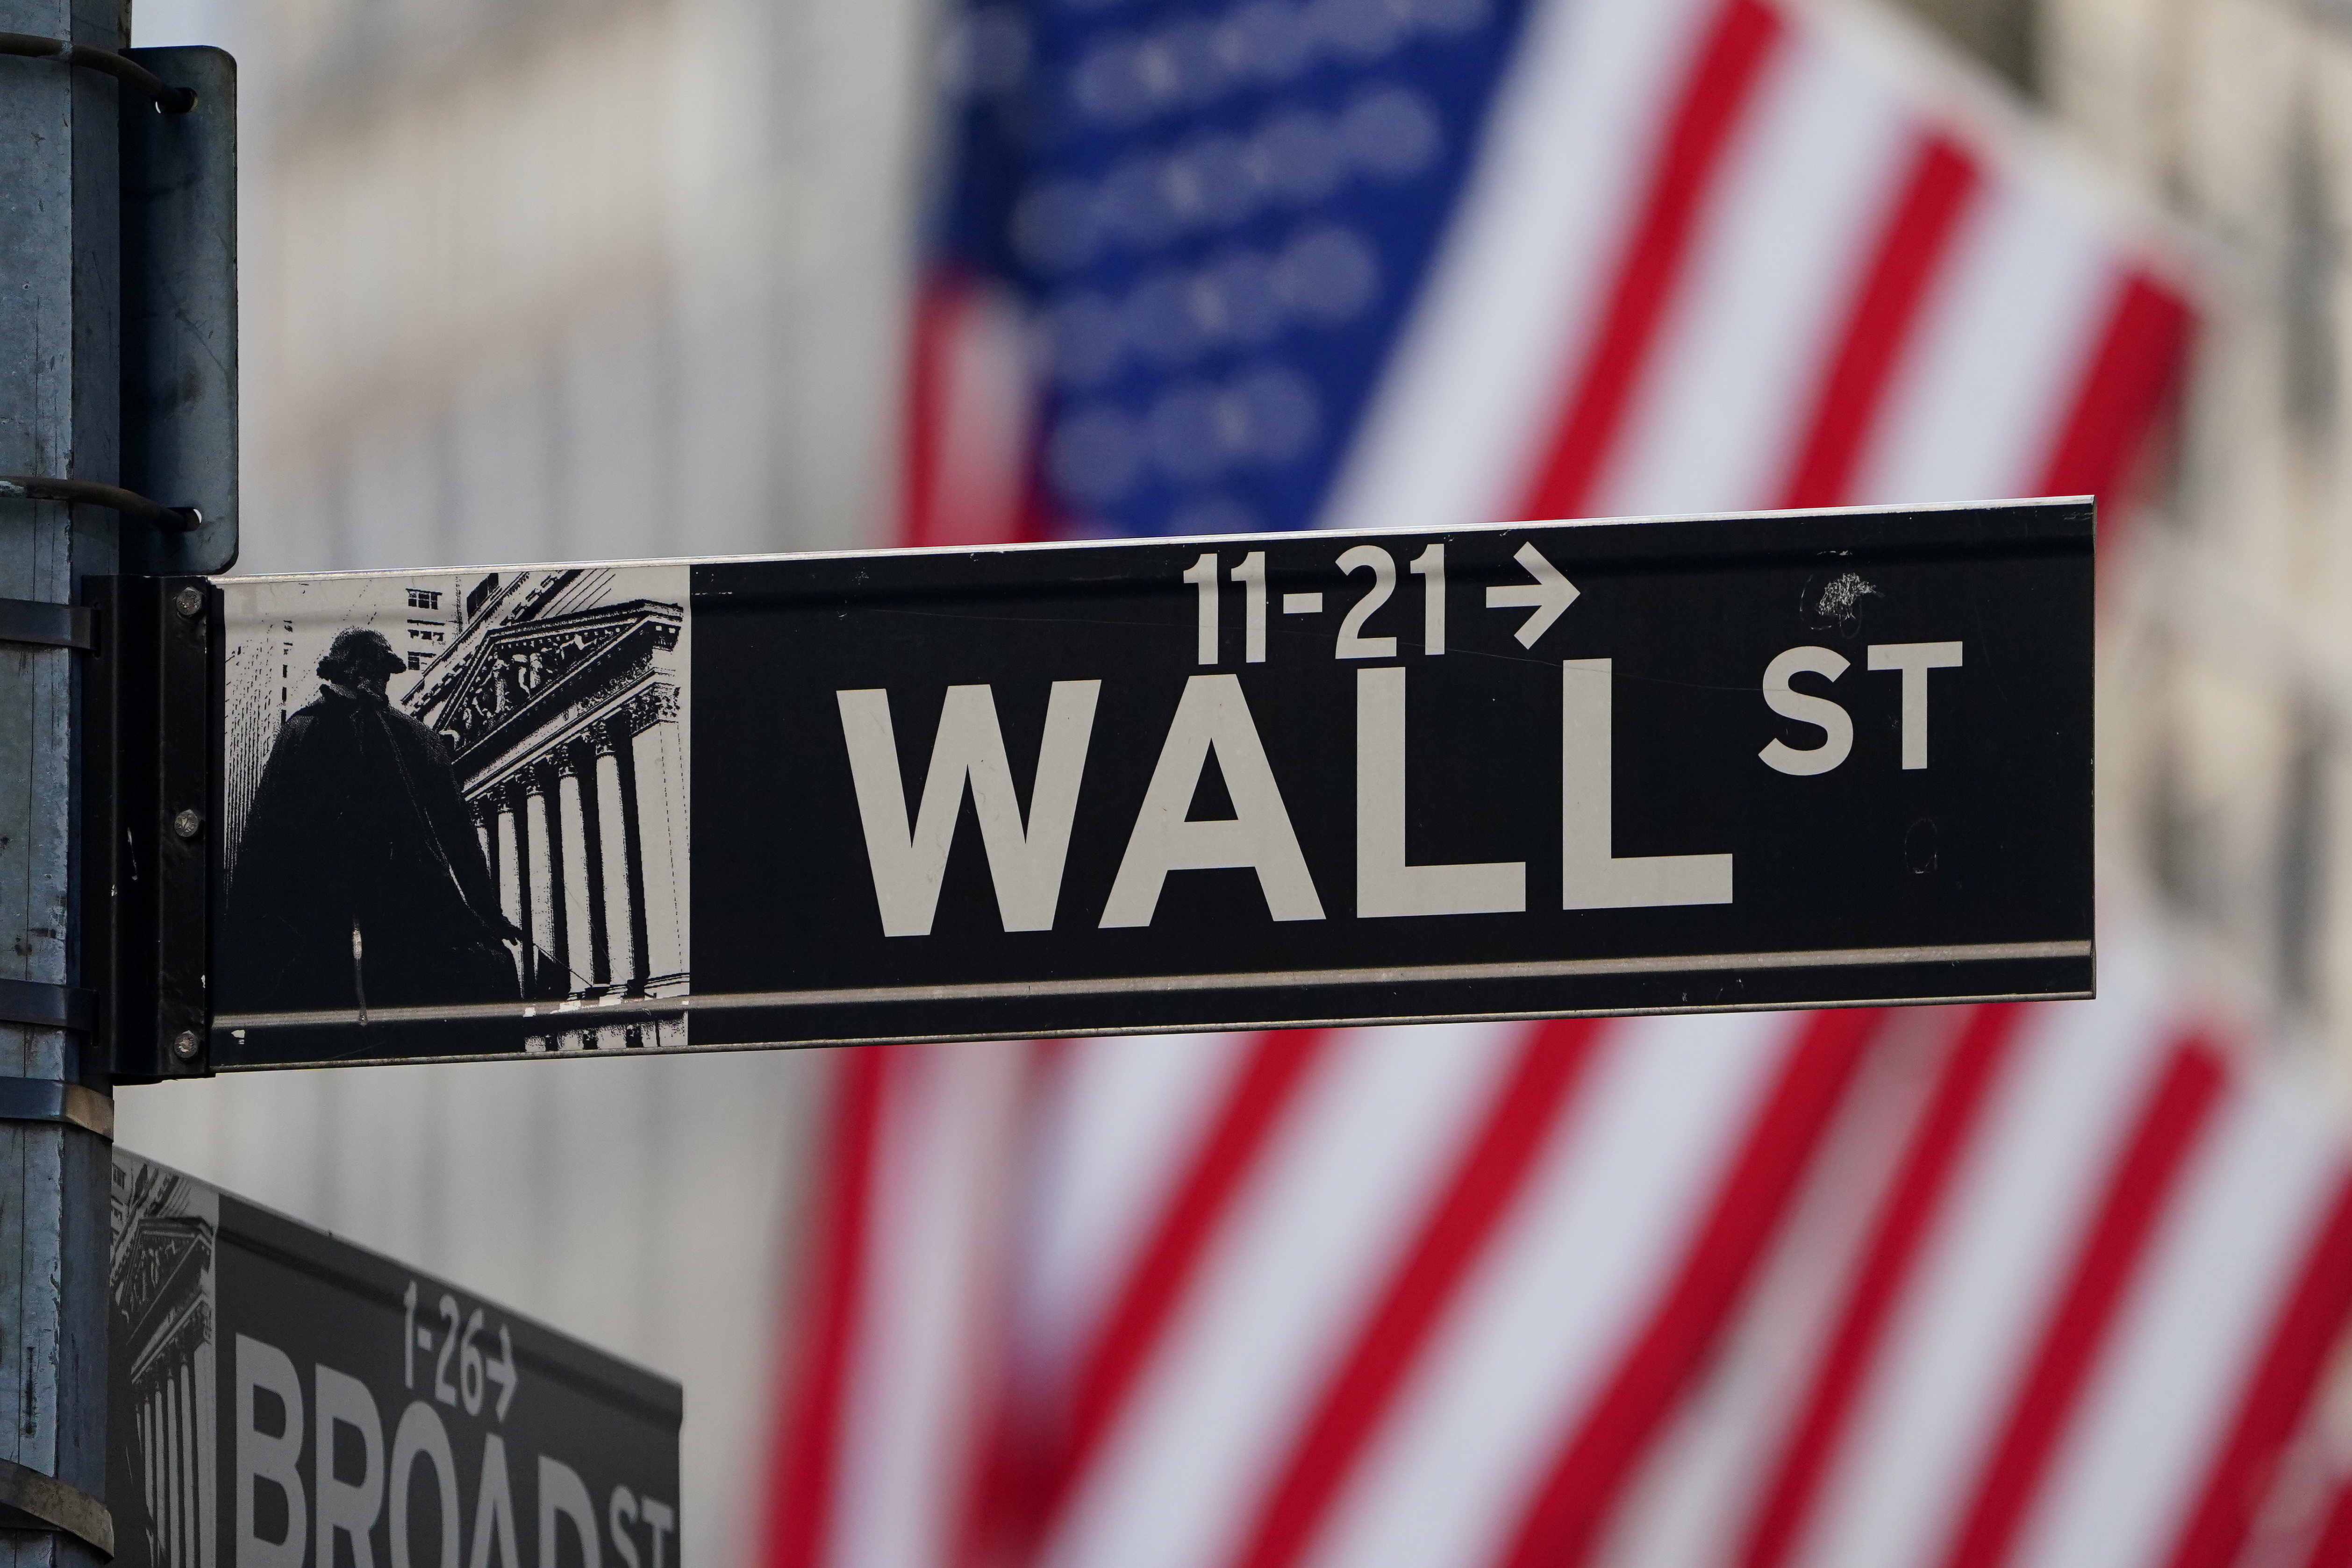 The Wall Street sign is pictured at the New York Stock exchange (NYSE) in the Manhattan borough of New York City